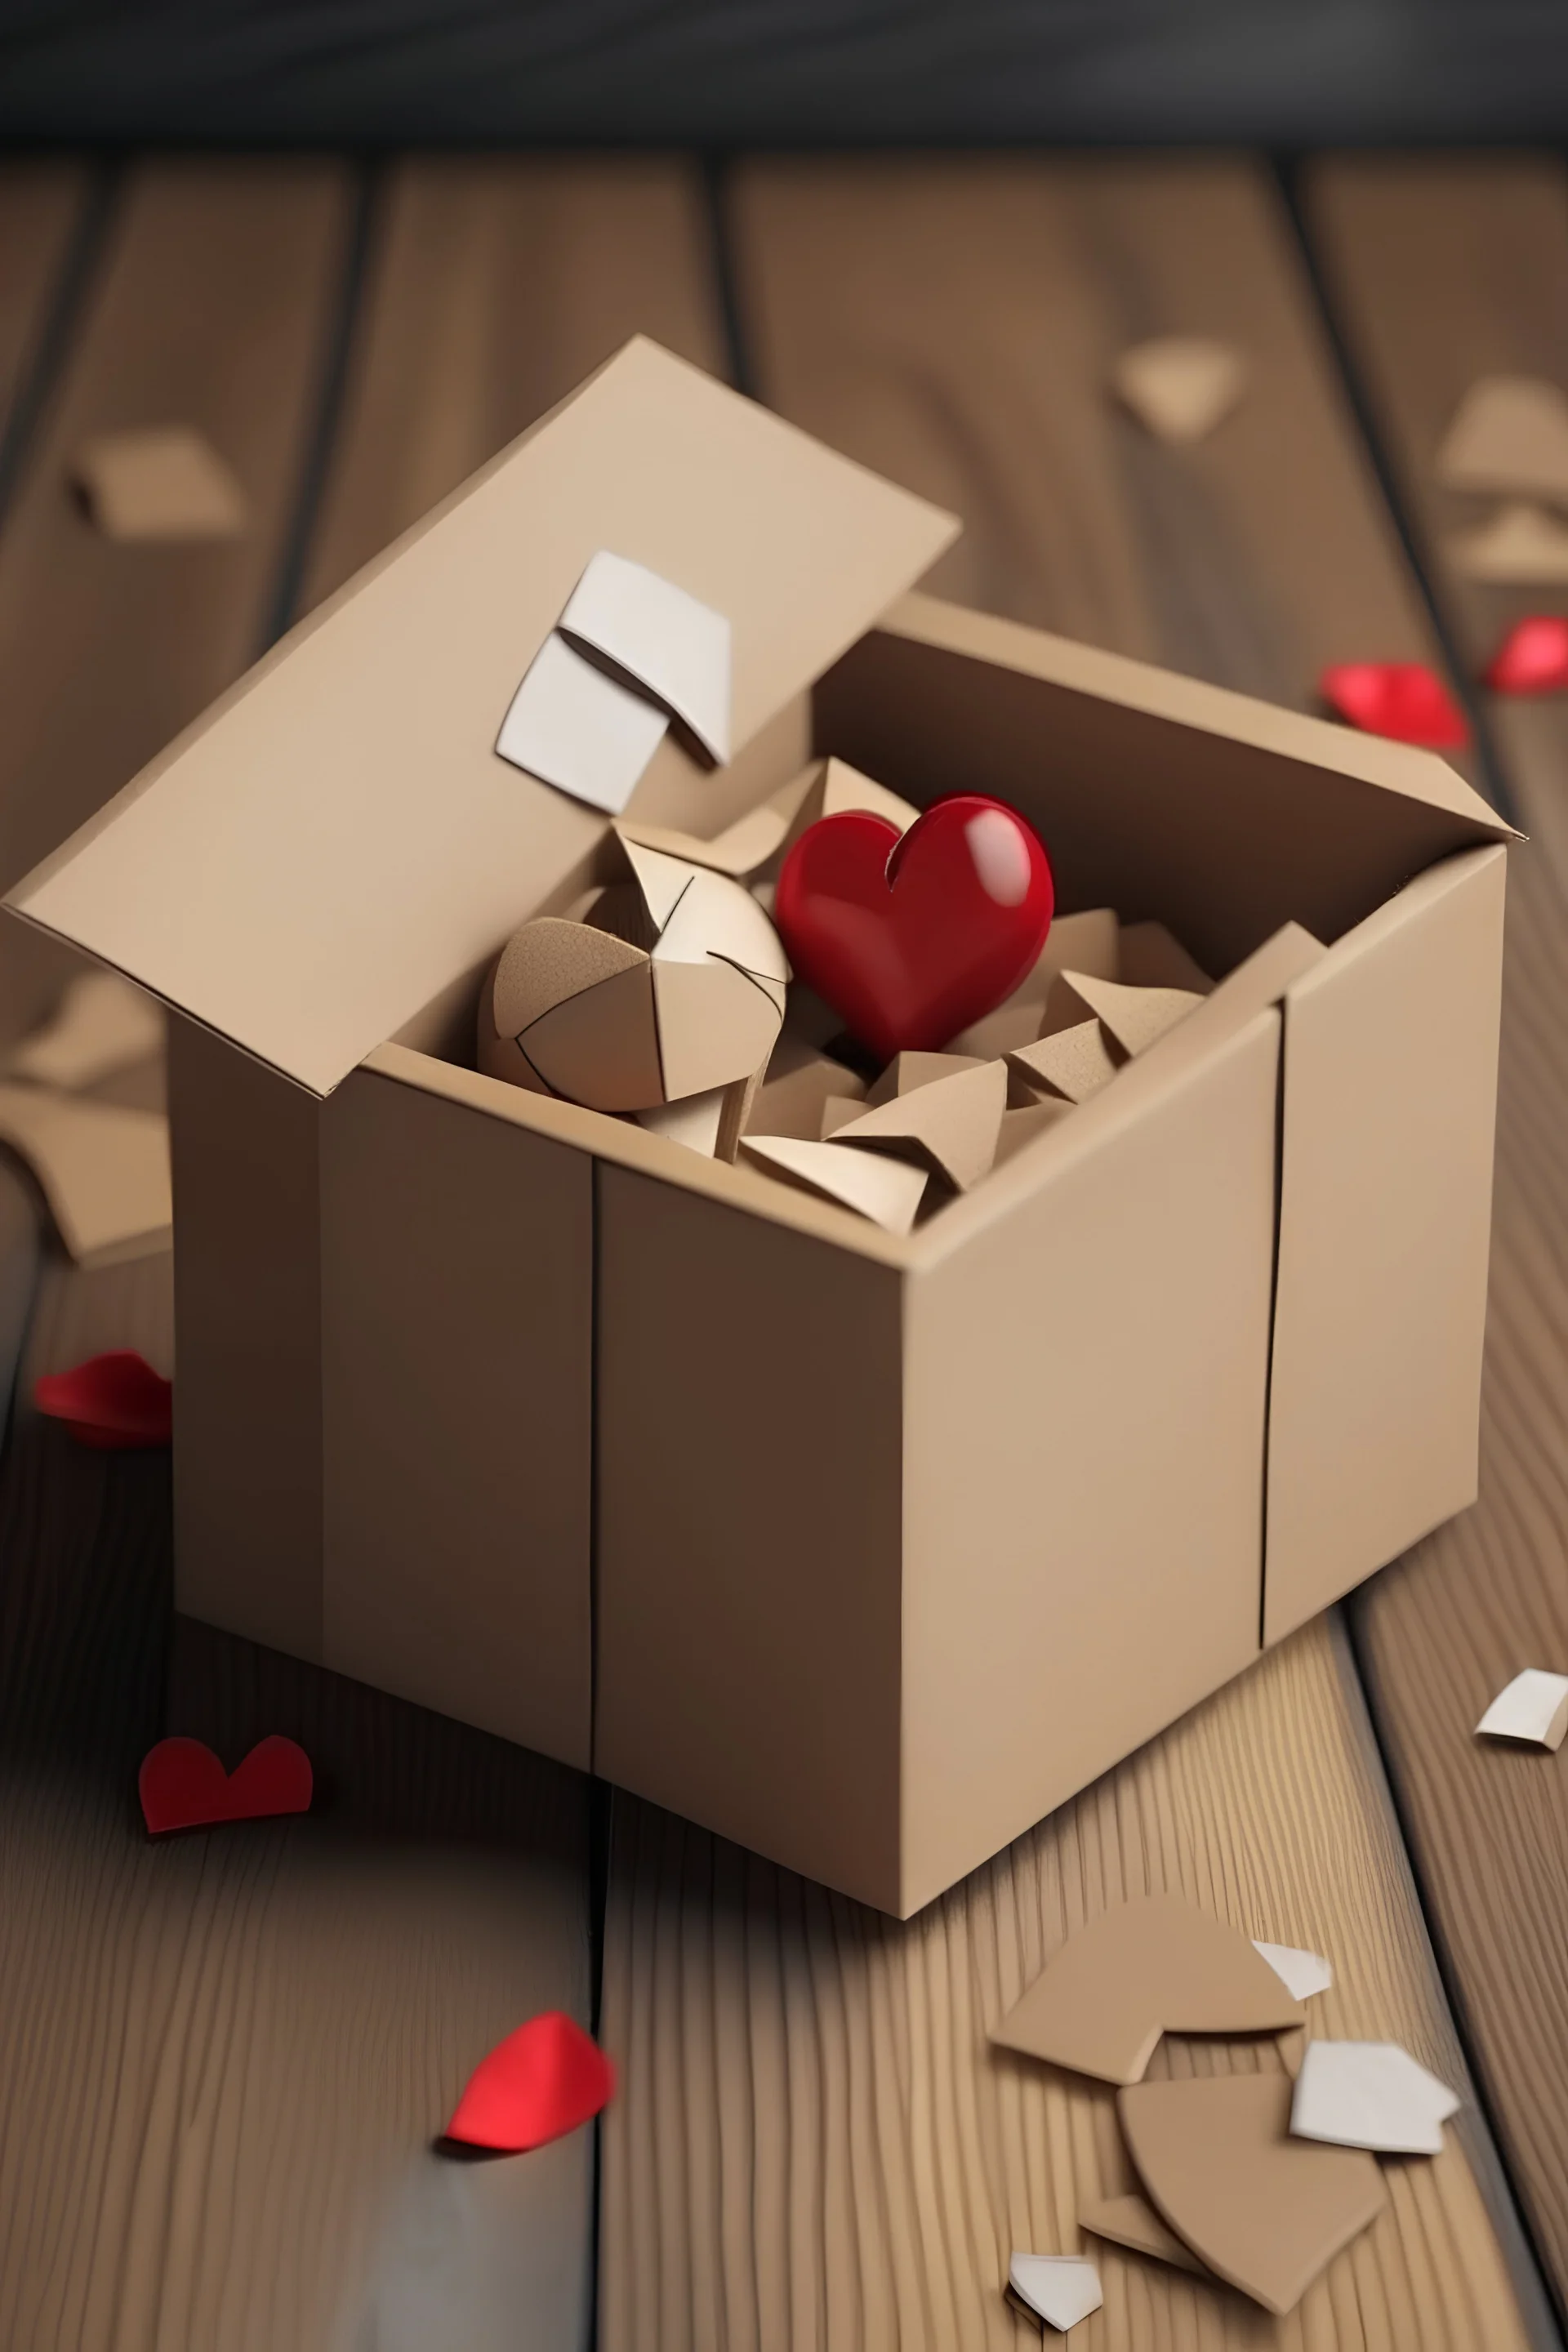 make a box with broken hearts and whole hearts, the title is "Healing Hearts"